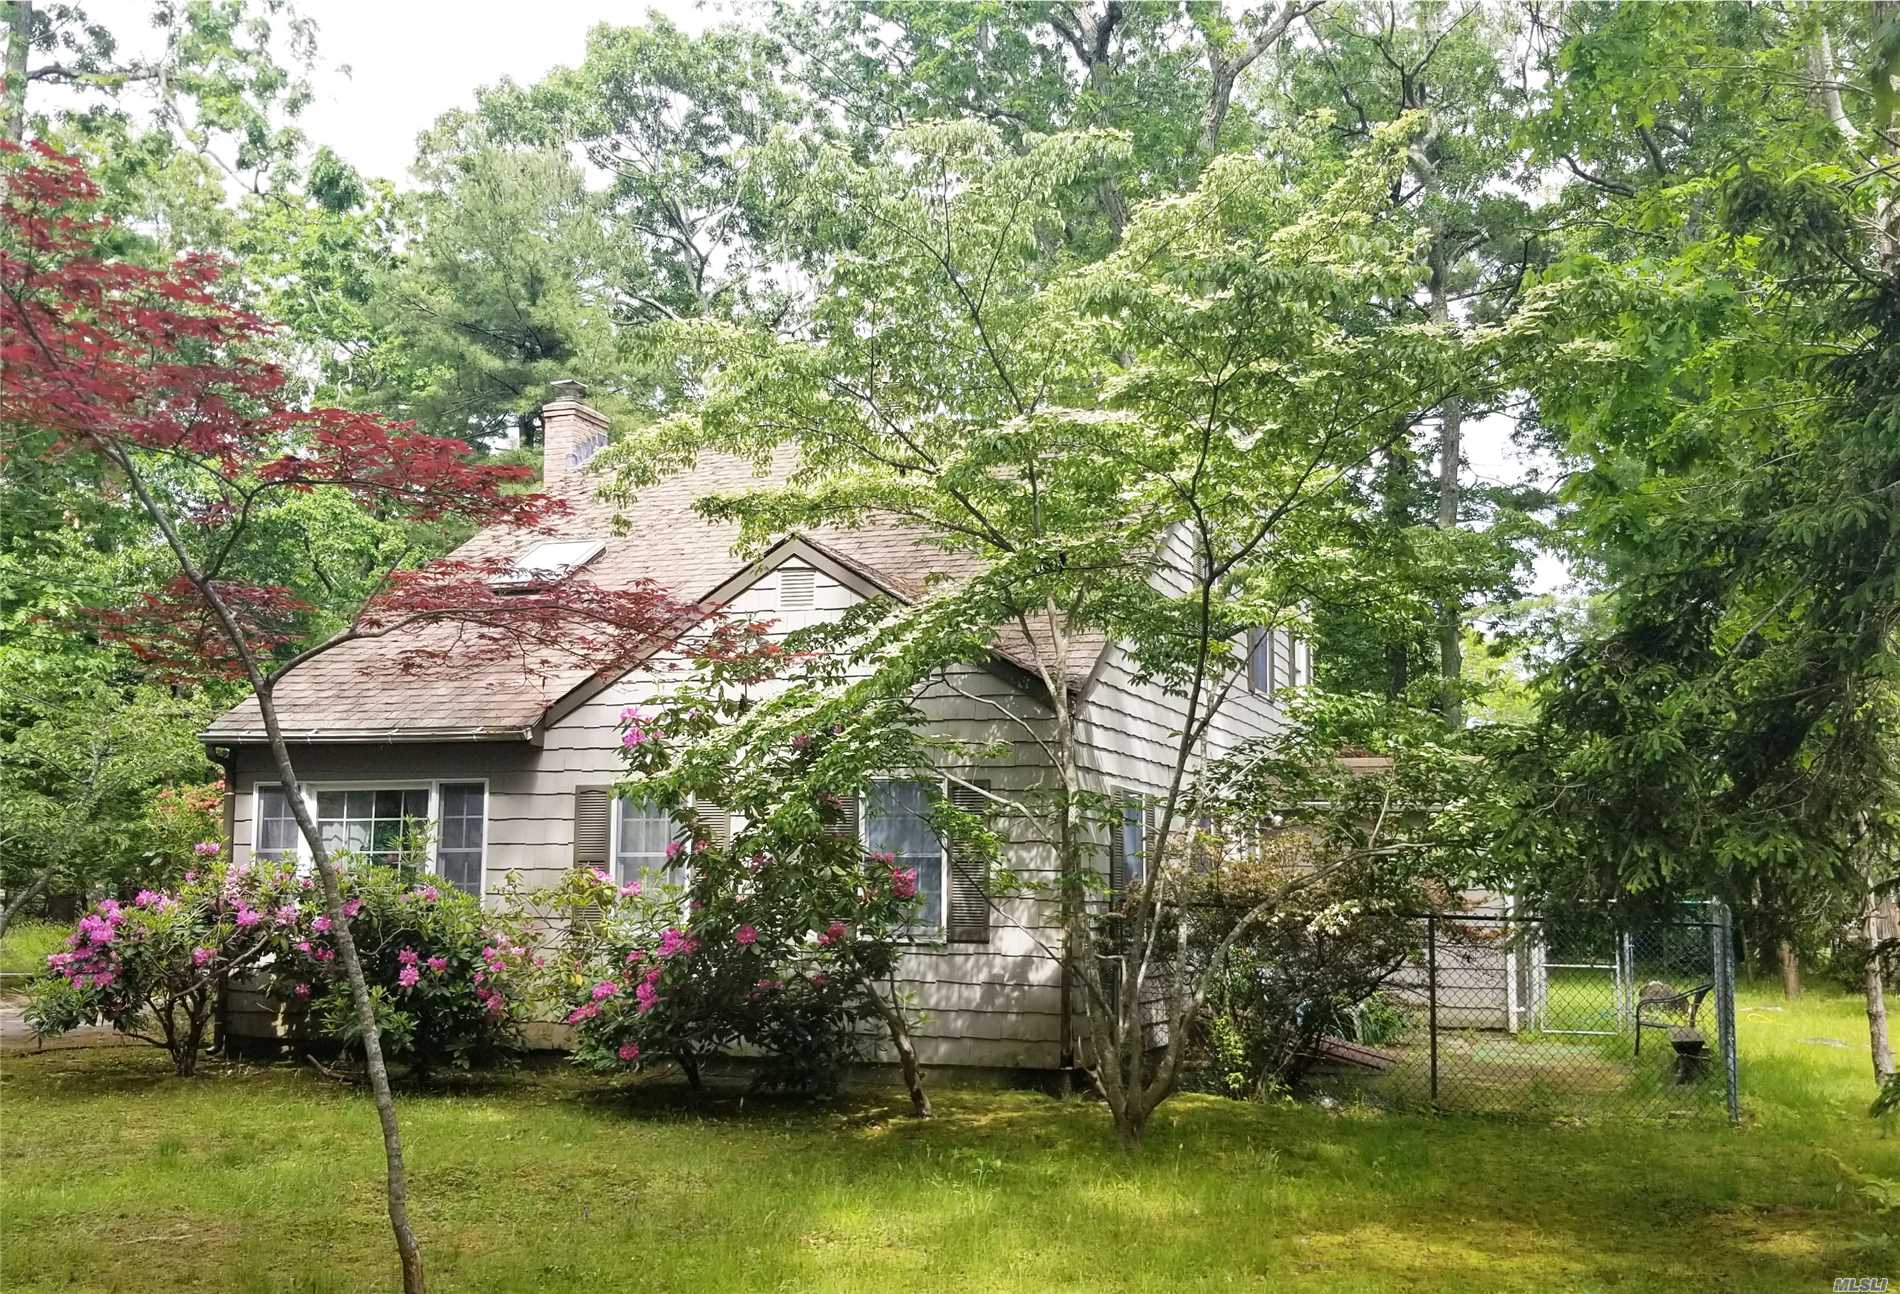 Come view this cute-as-a-button North Fork getaway, quietly tucked away in the woods near the east end of Great Hog Neck. There&rsquo;s a beautiful private beach for the Paradise Shores community at the end of the lane. Second floor master suite with library, formal dining room, CAC. Don&rsquo;t miss out!